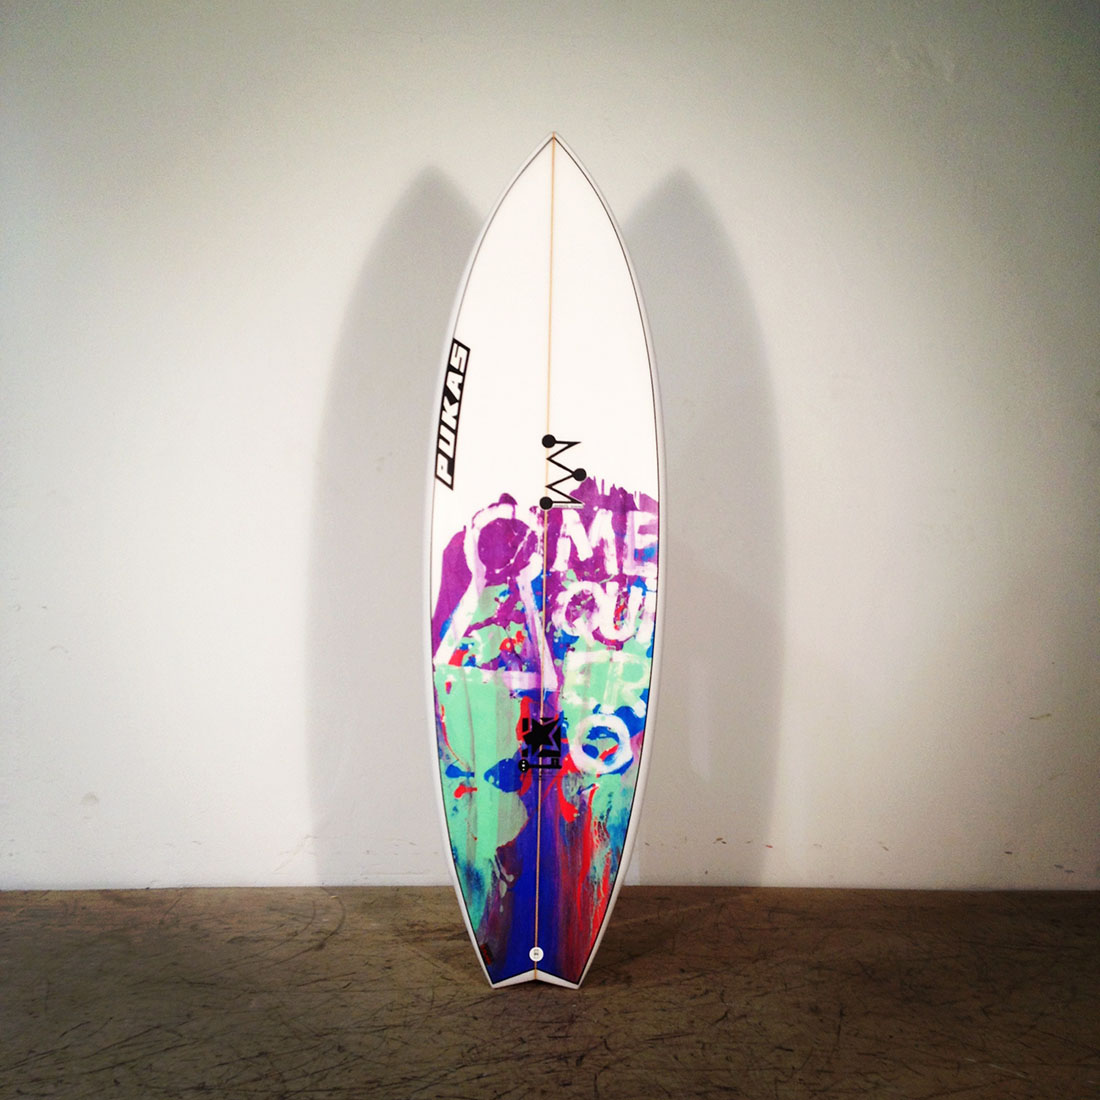 Pukas Surf Surfboards ArMario shaped by Mikel Agote